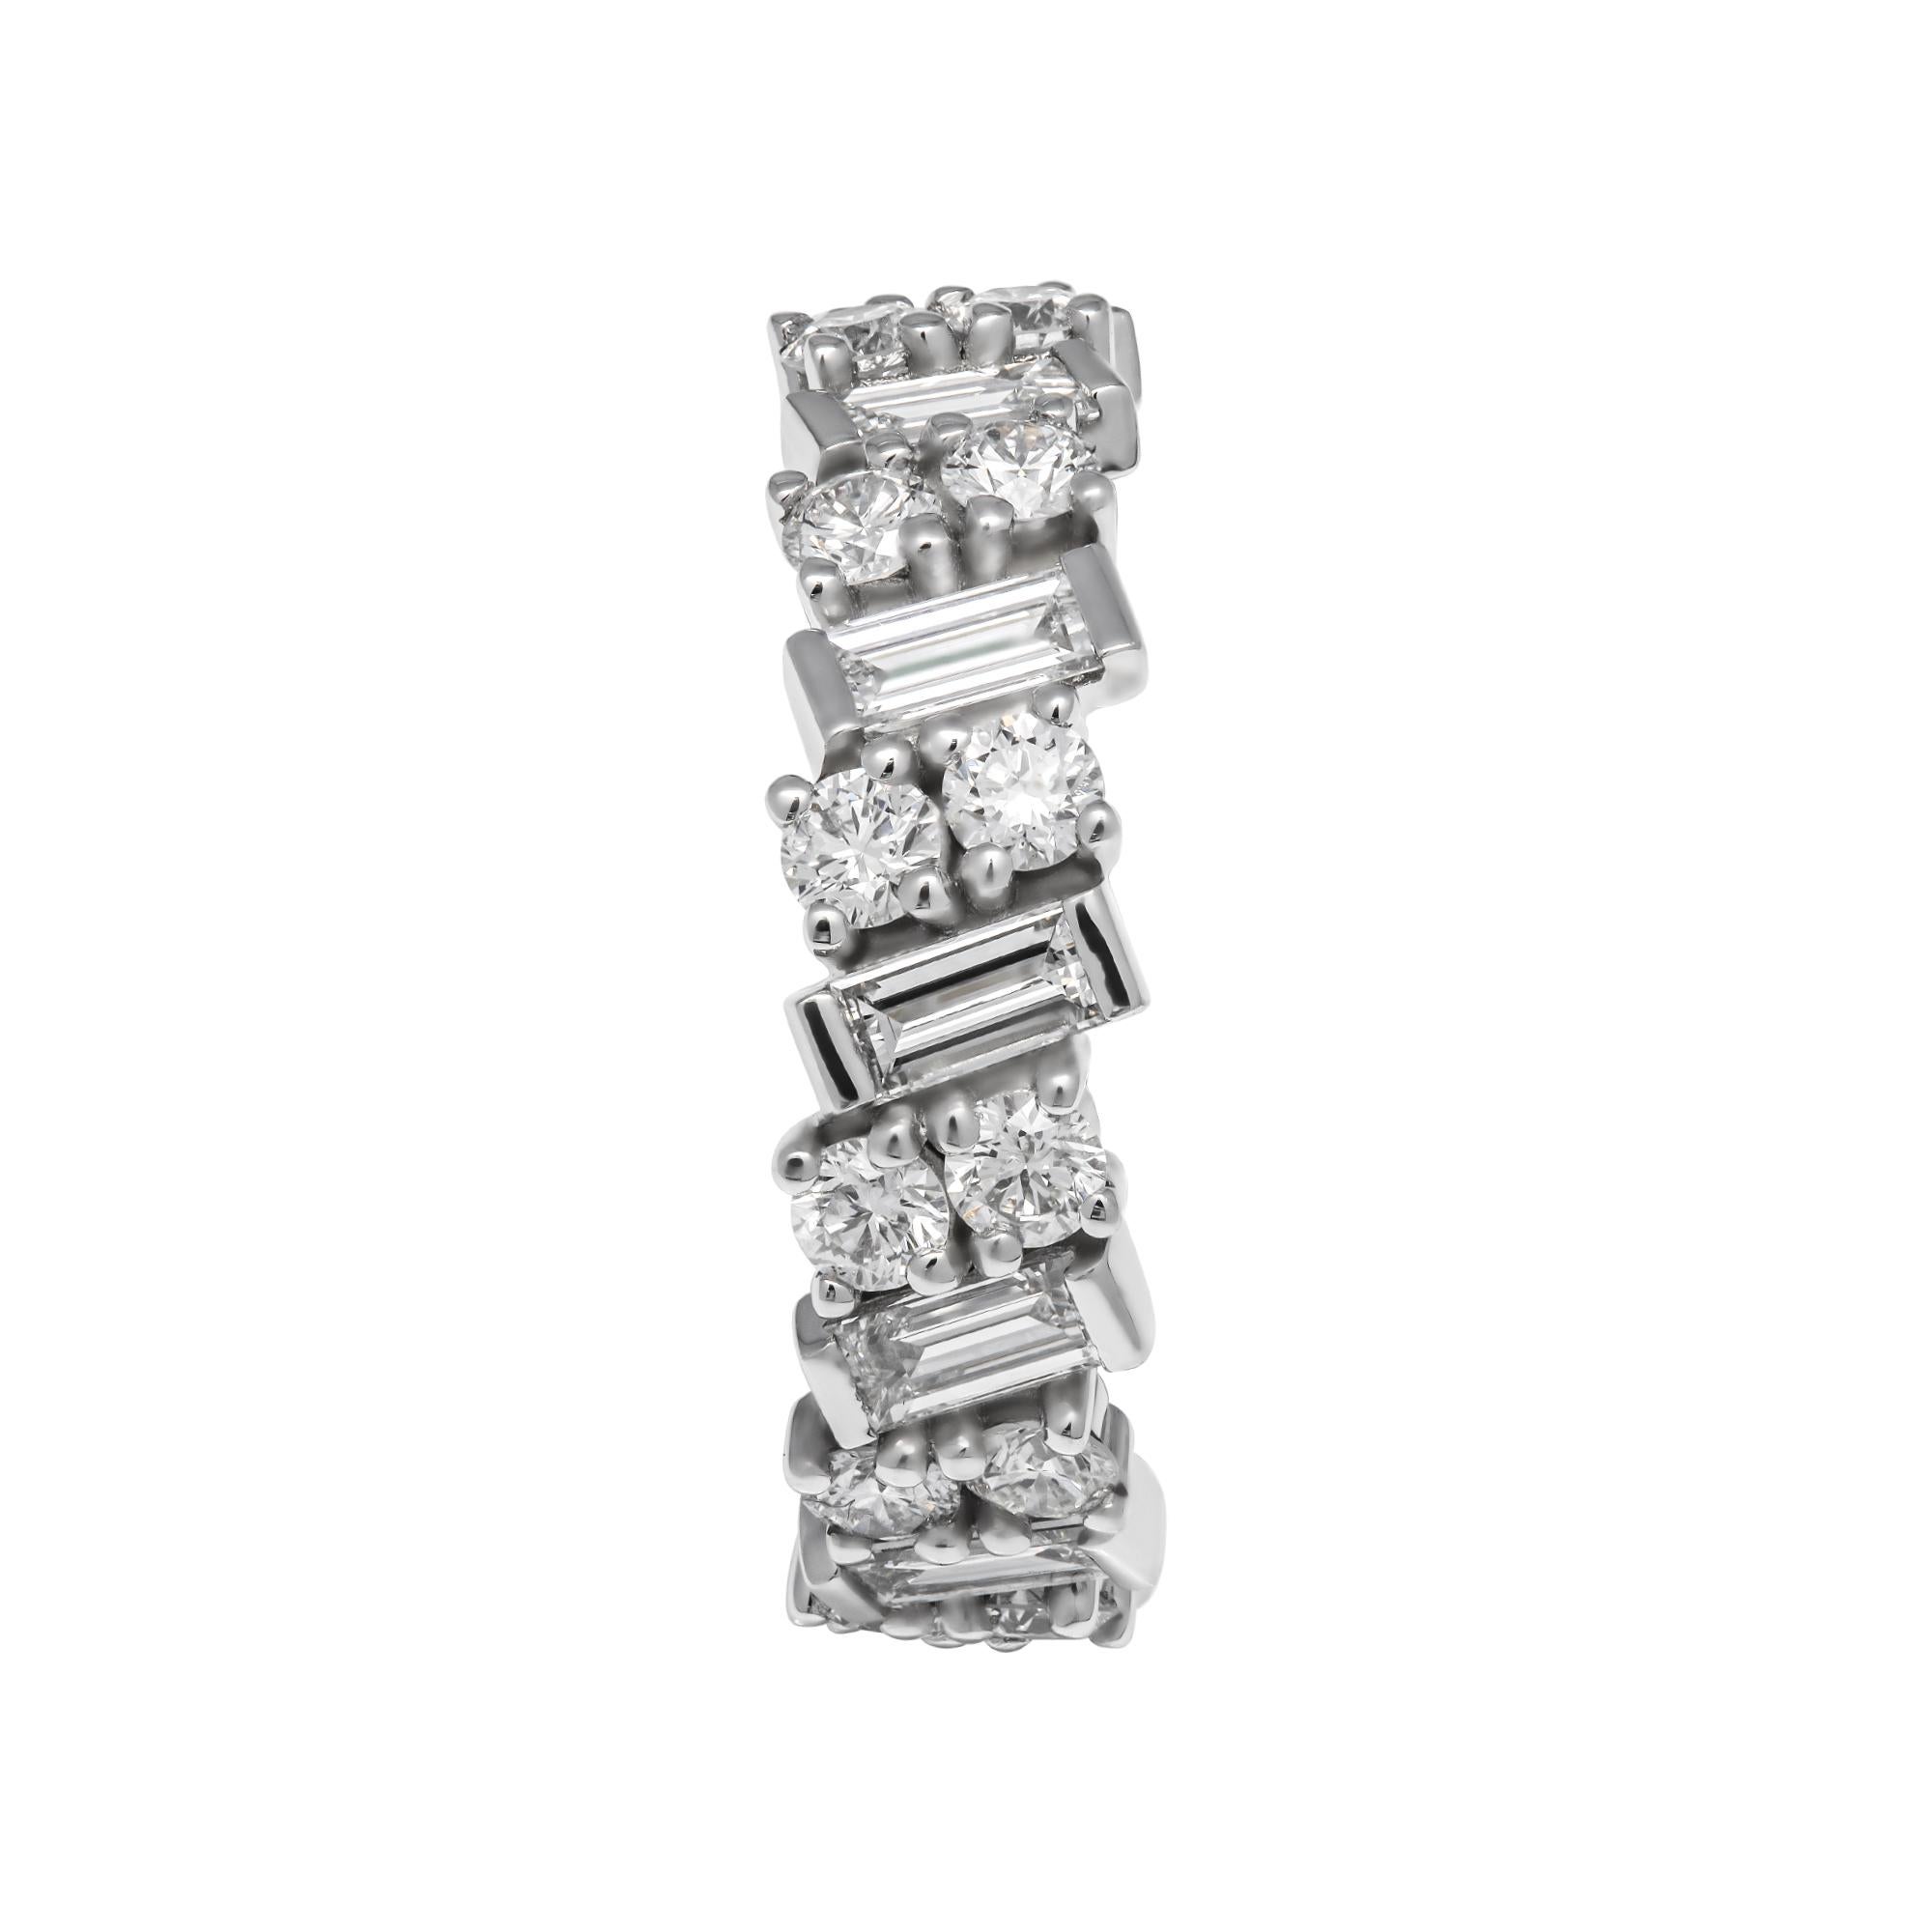 Diamond Band In Platinum 950
Beautiful and Timeless piece of Jewelry! Trend of this season,
Mounted in Platinum with almost 22 full cut Round diamonds & 11 Baguette Diamonds F-G color, VVS, totaling 2.35ct - Making a full circle of endless sparkle,